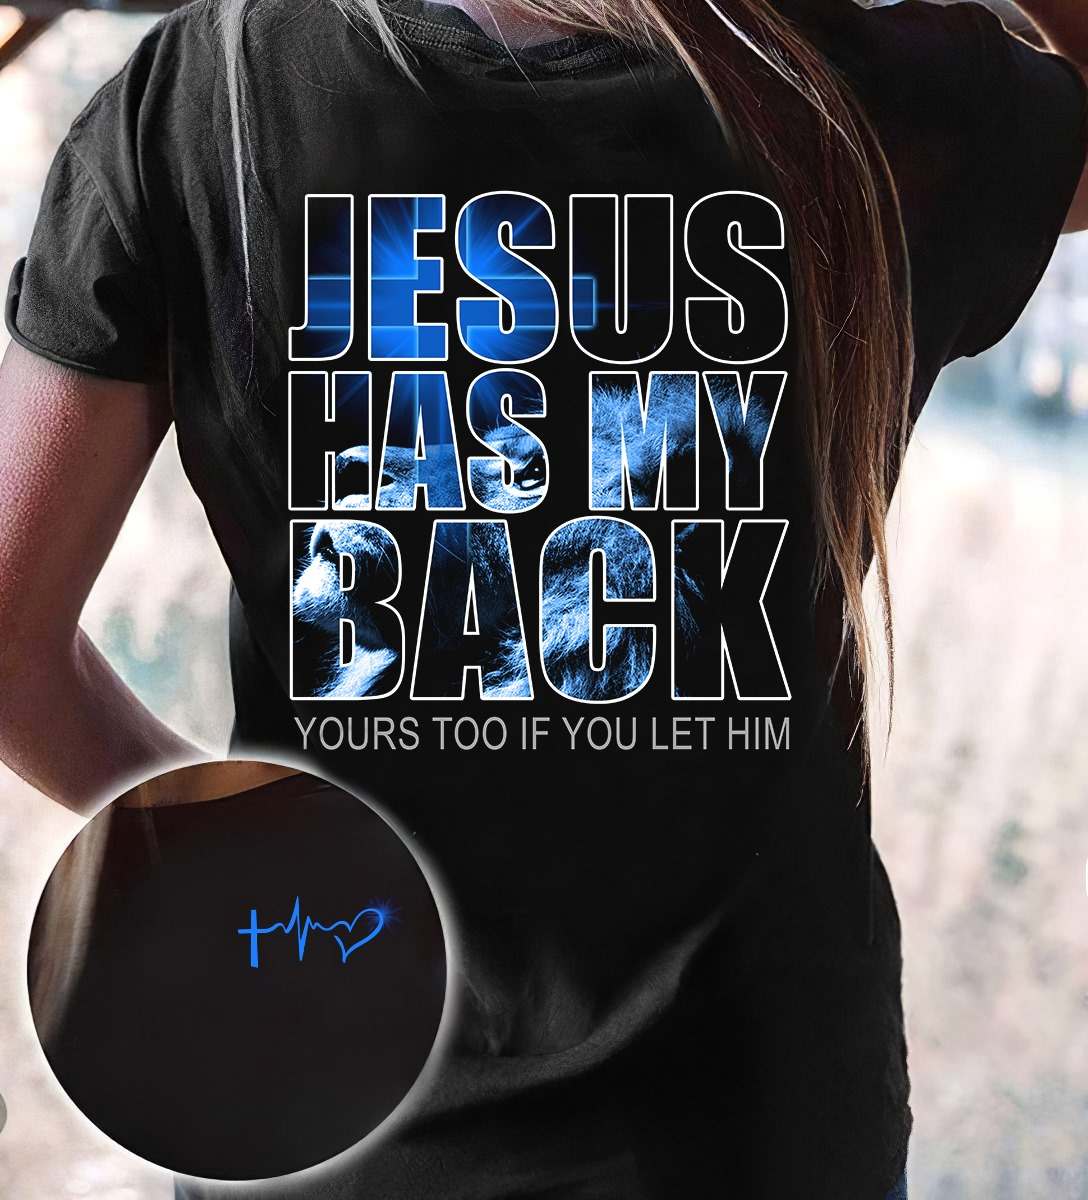 Jesus' Heartbeat - Jesus has my back your too if you let him